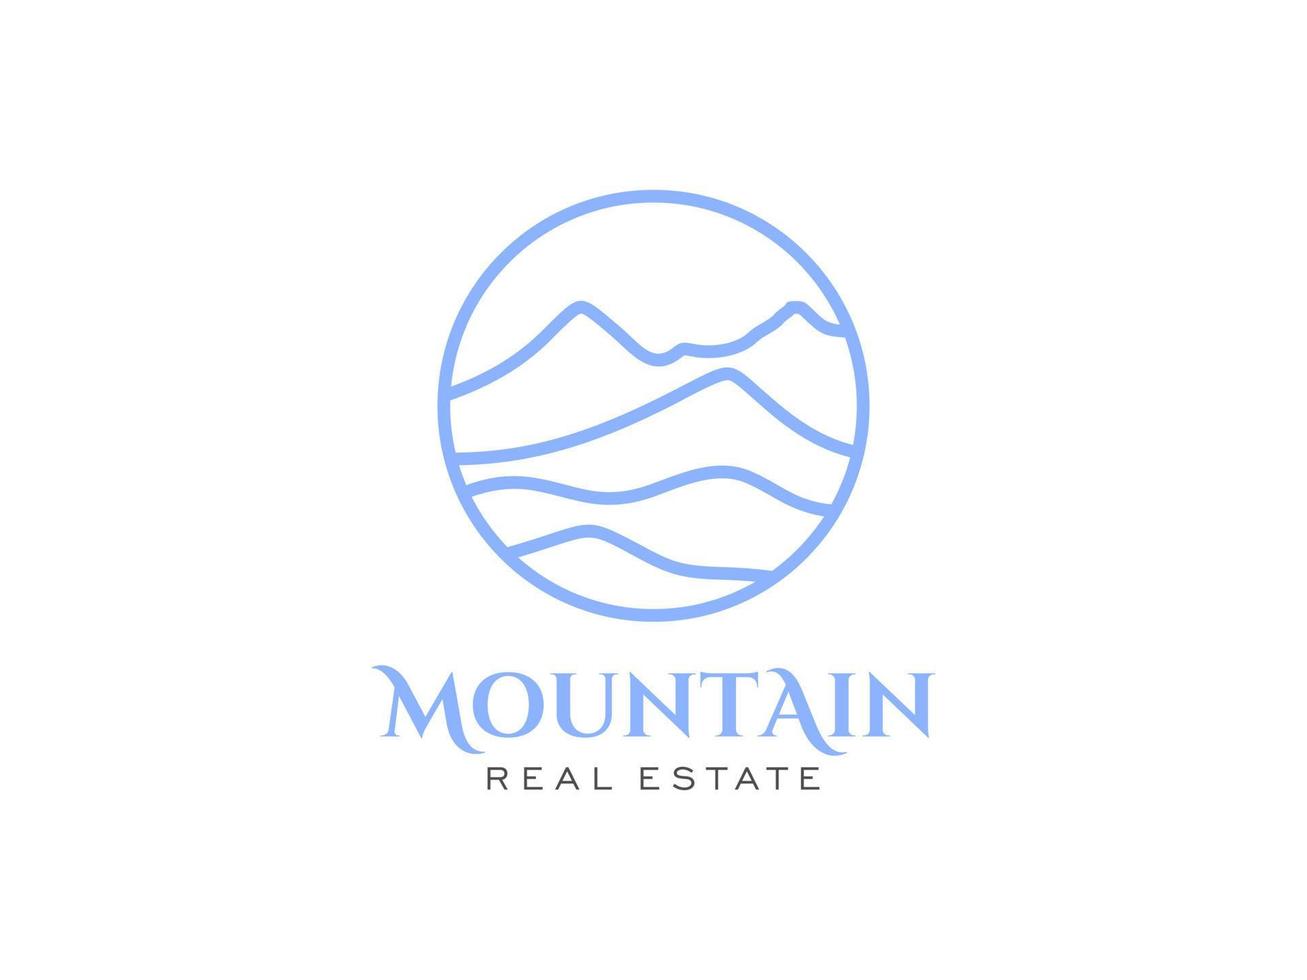 Abstract Mountain Logo. White Shape Mountain Silhouette with Outline Style Combination isolated on White Background. Flat Vector Logo Design Template